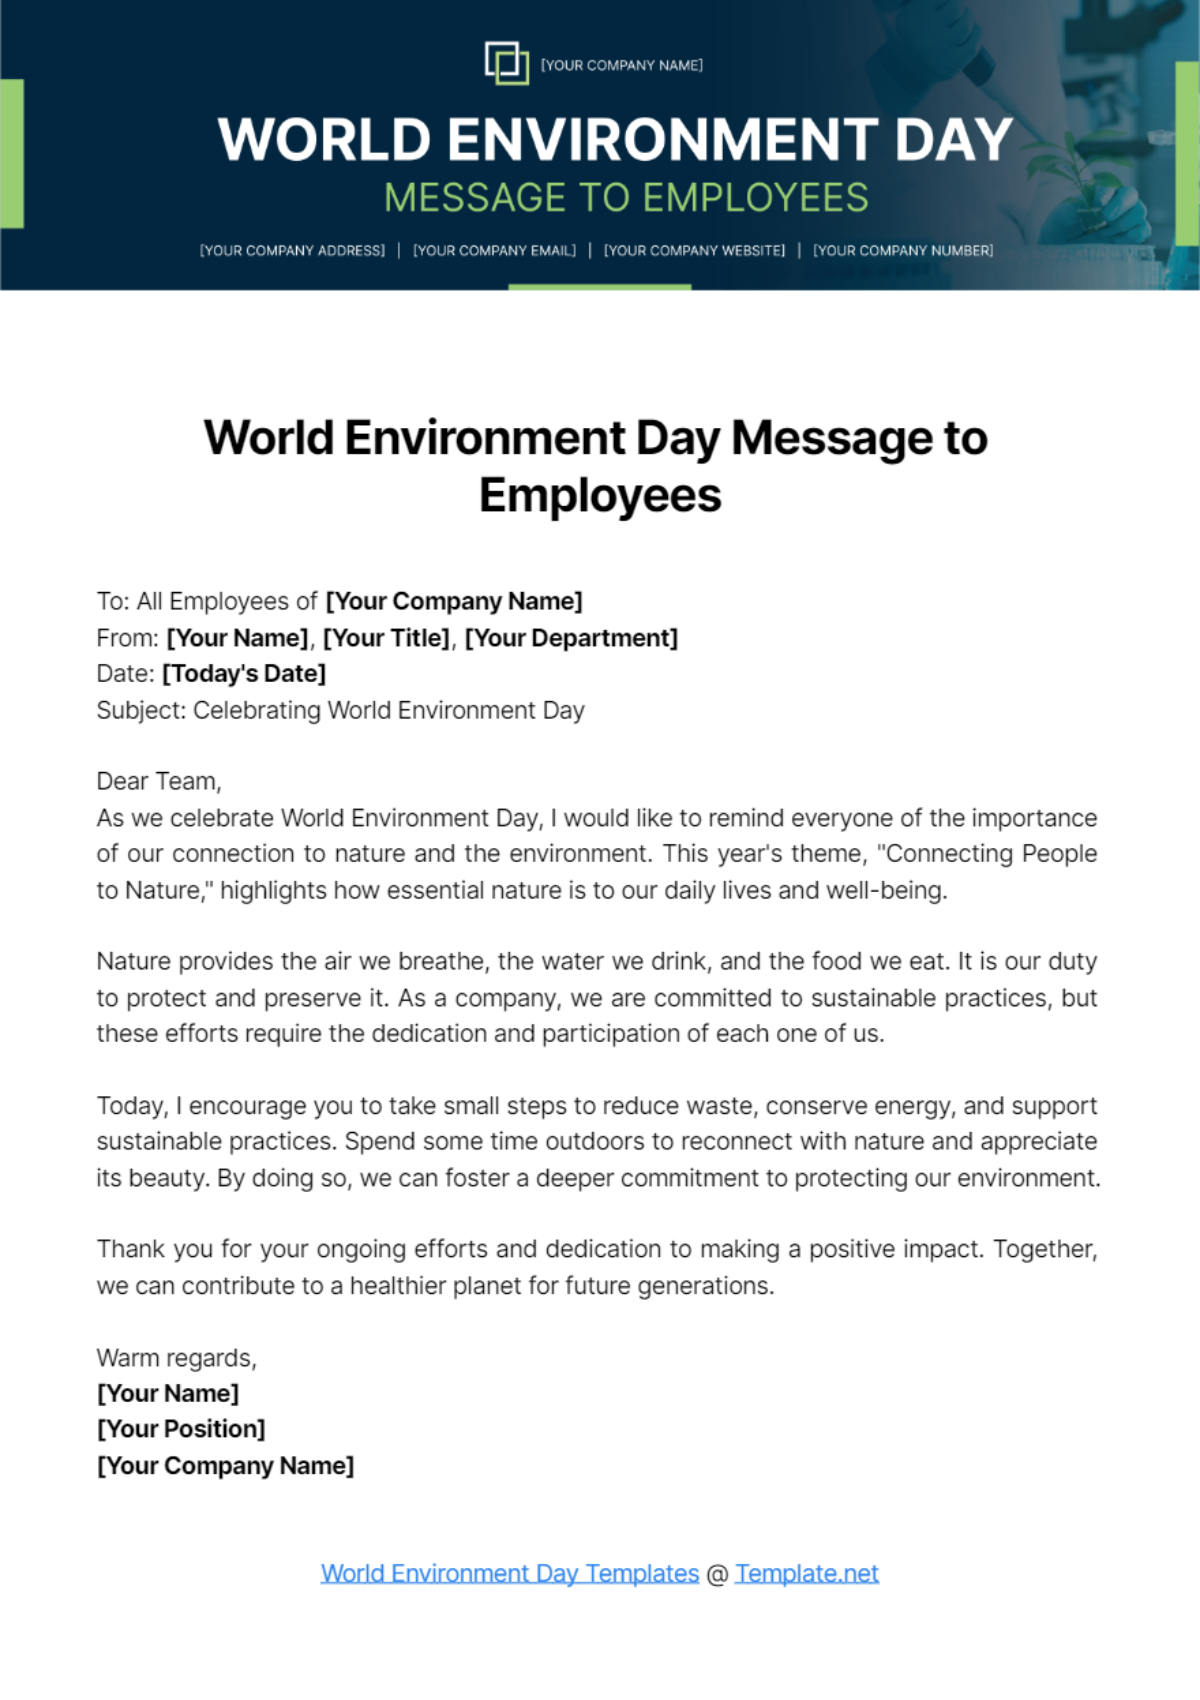 Free World Environment Day Message to Employees Template